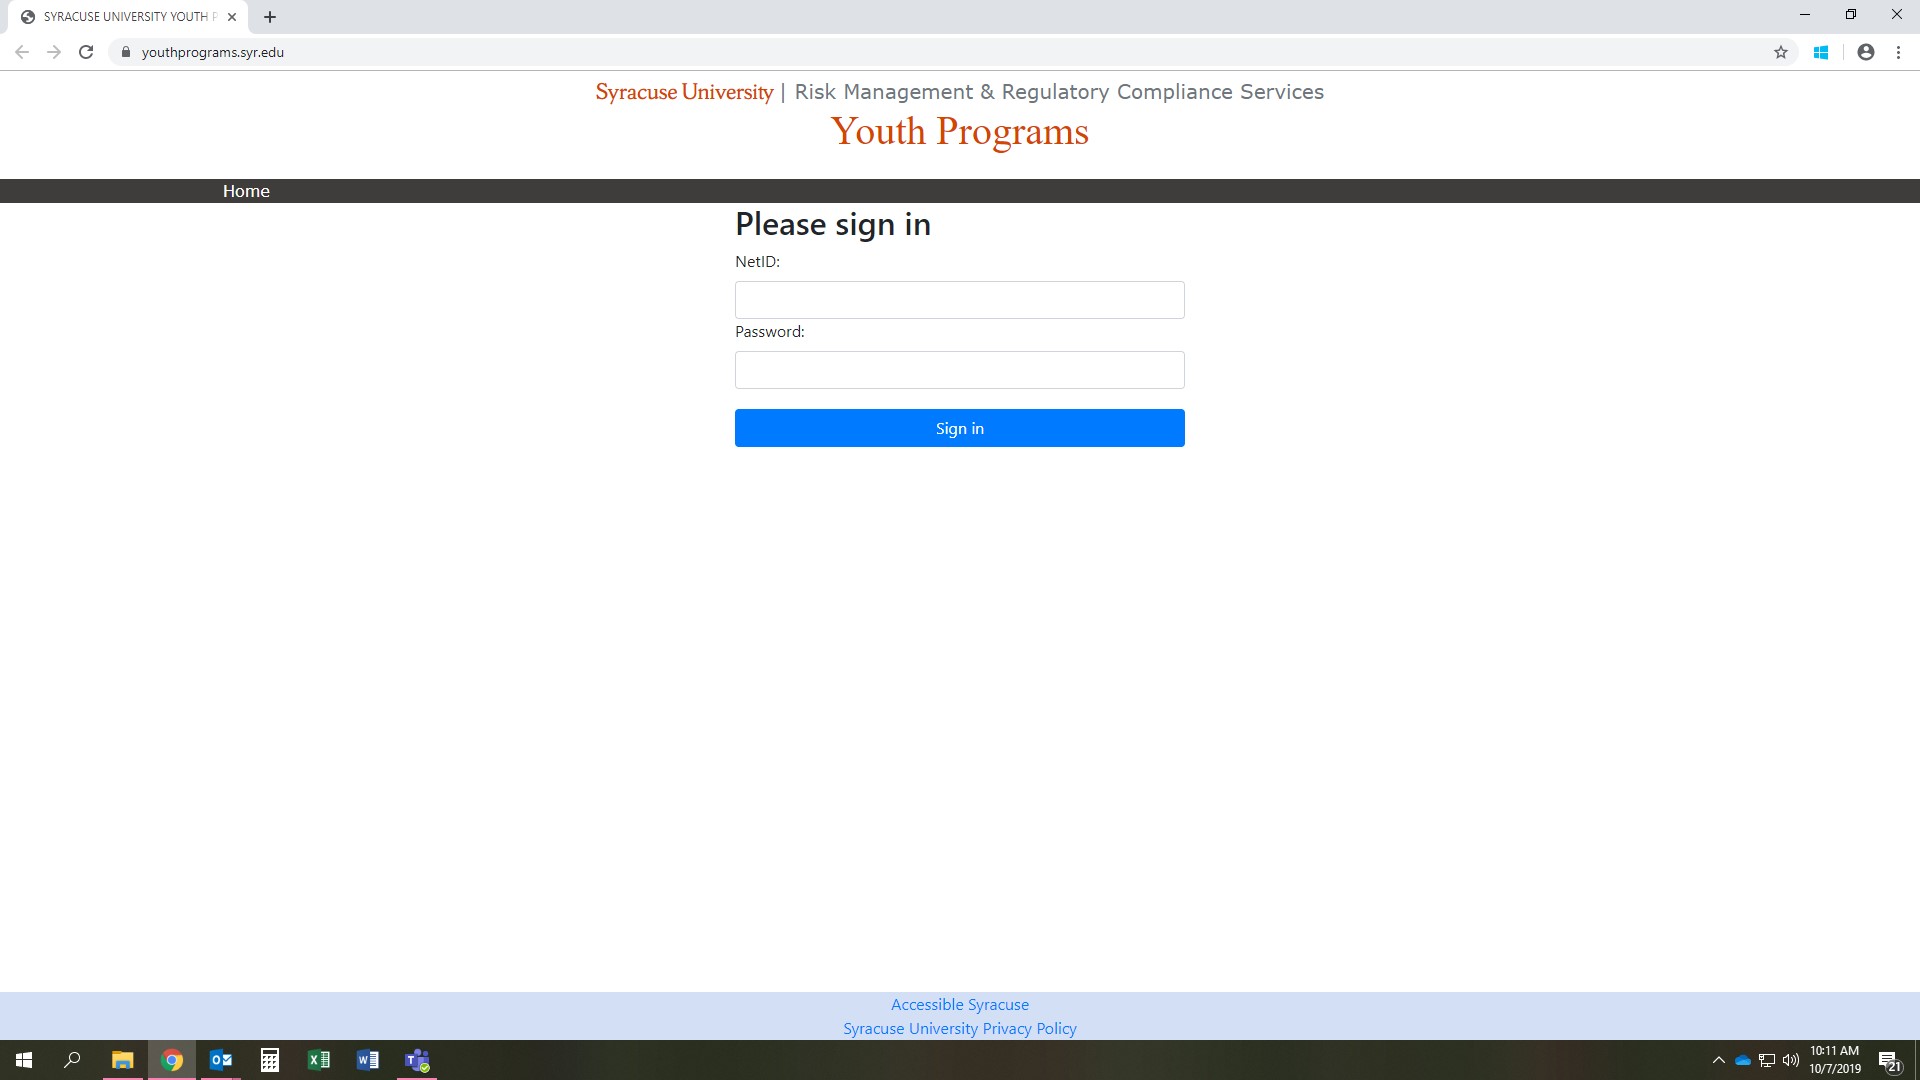 This shows the youthprograms.syr.edu login page prior to logging in with Syracuse University MySlice credentials.